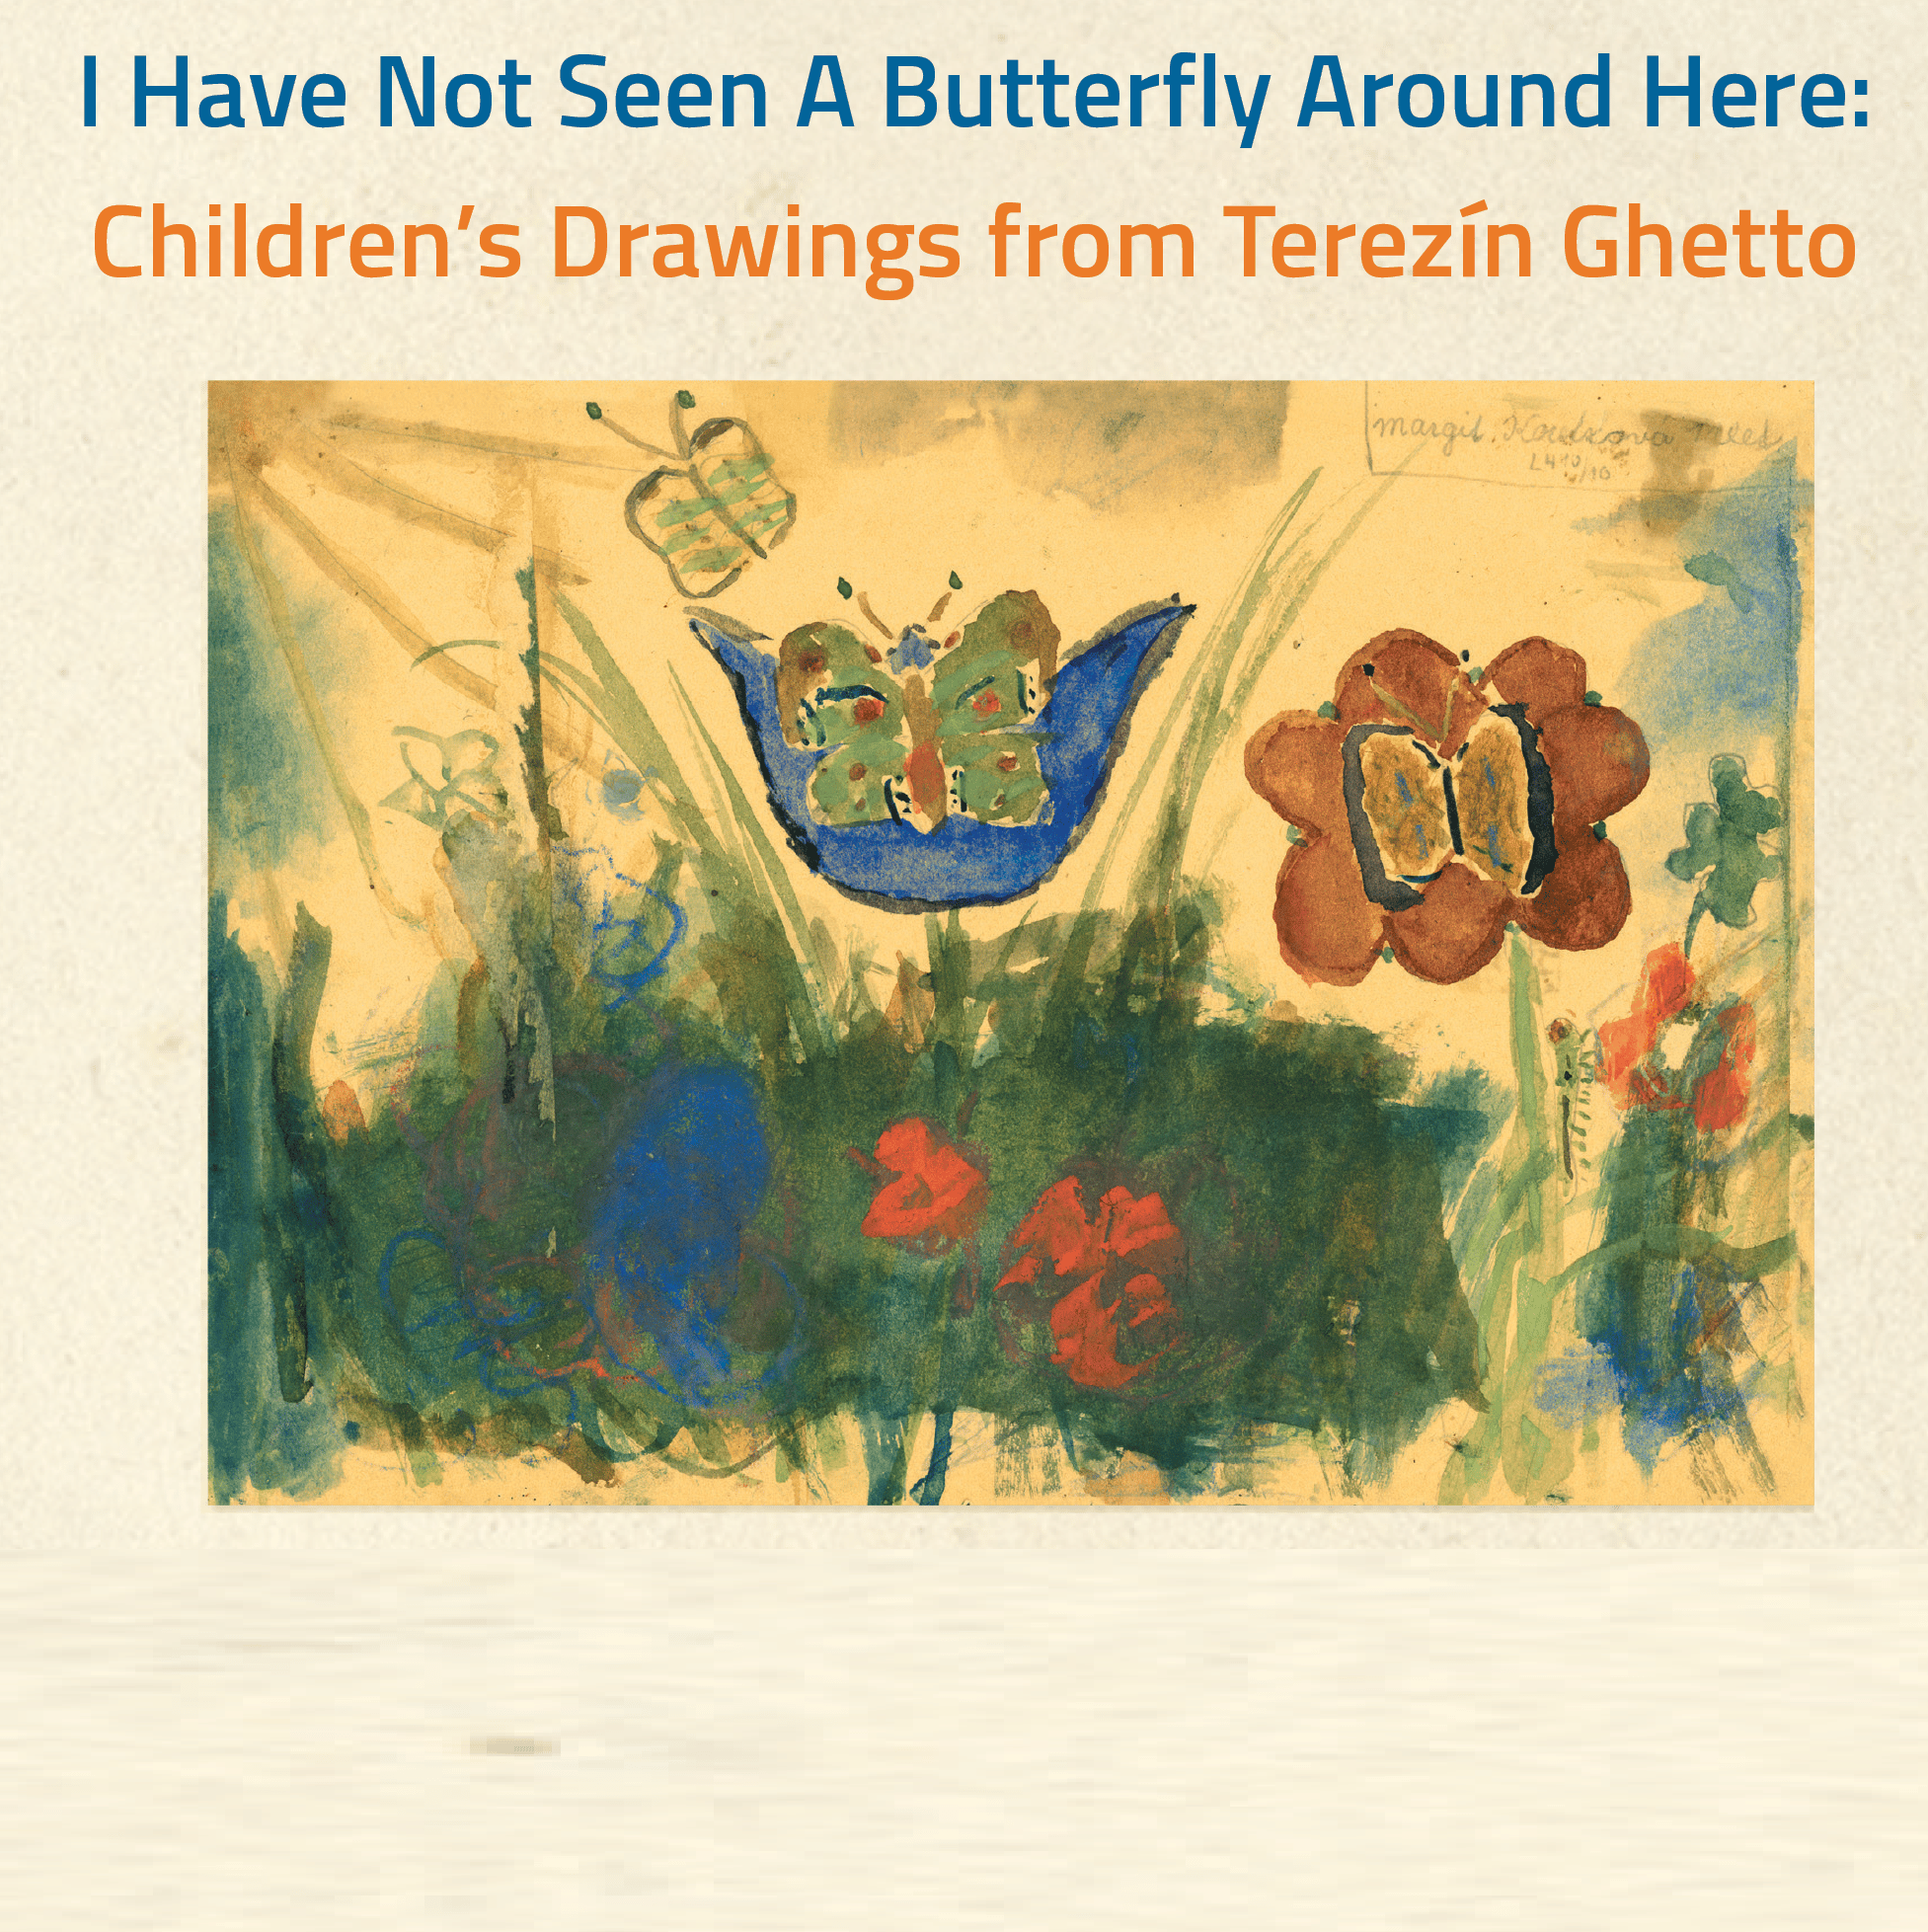 I have not seen a butterly around here